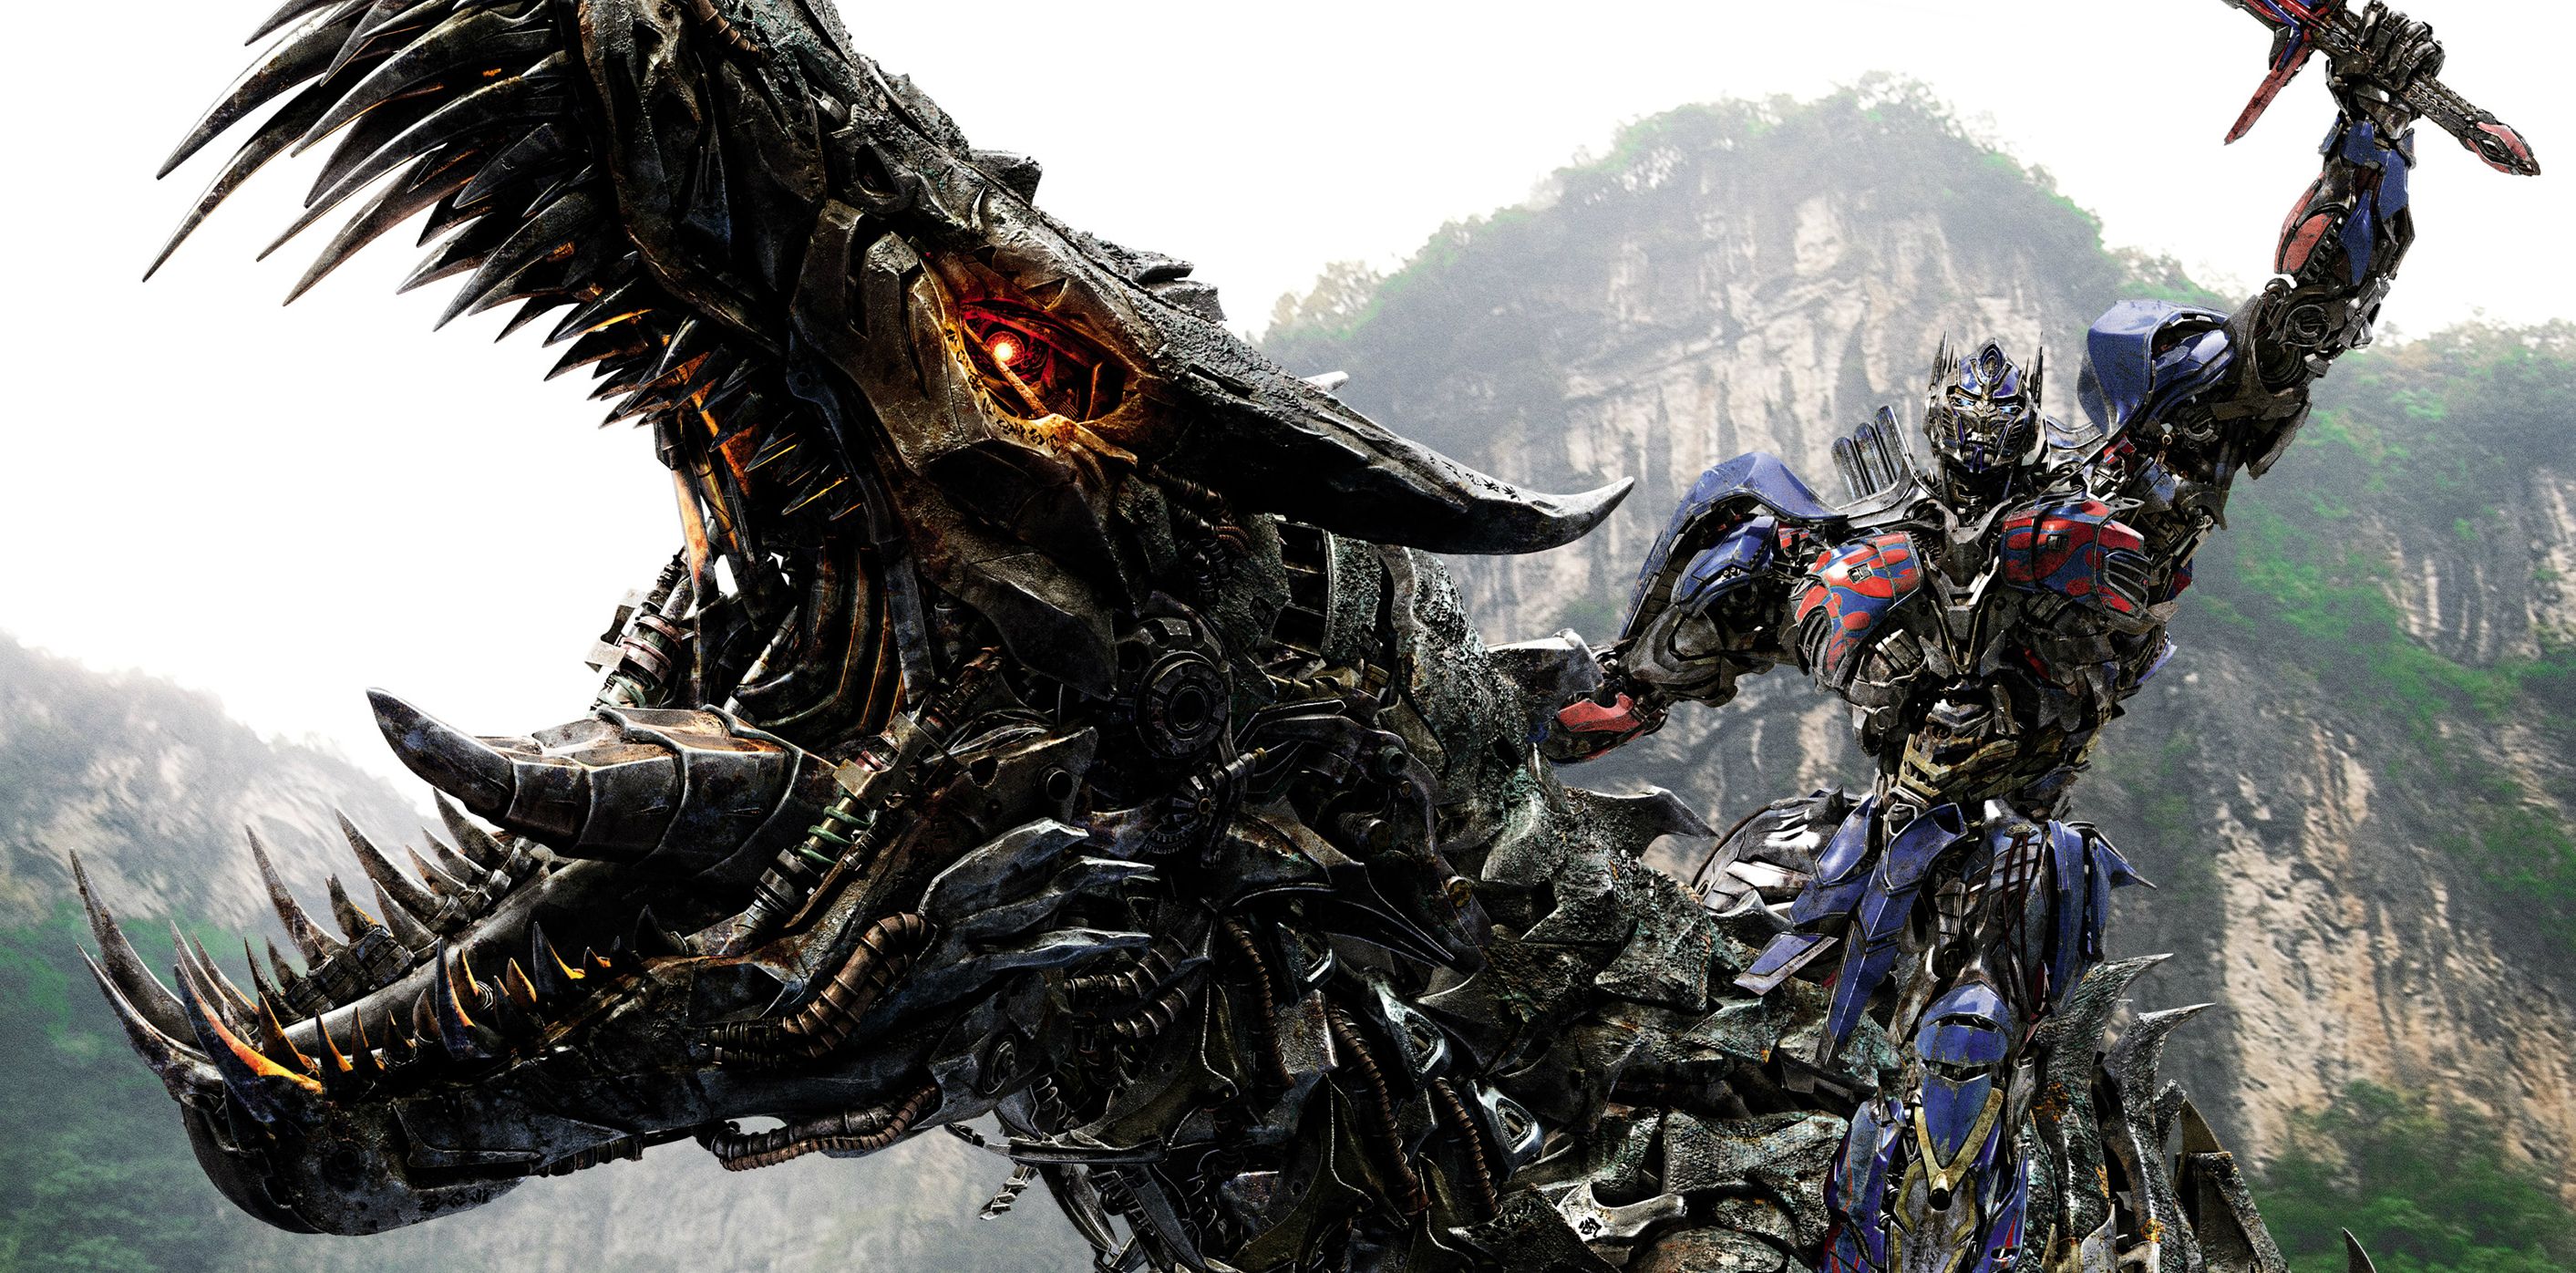 Optimus Prime riding a Dinobot in Transformers Age of Extinction